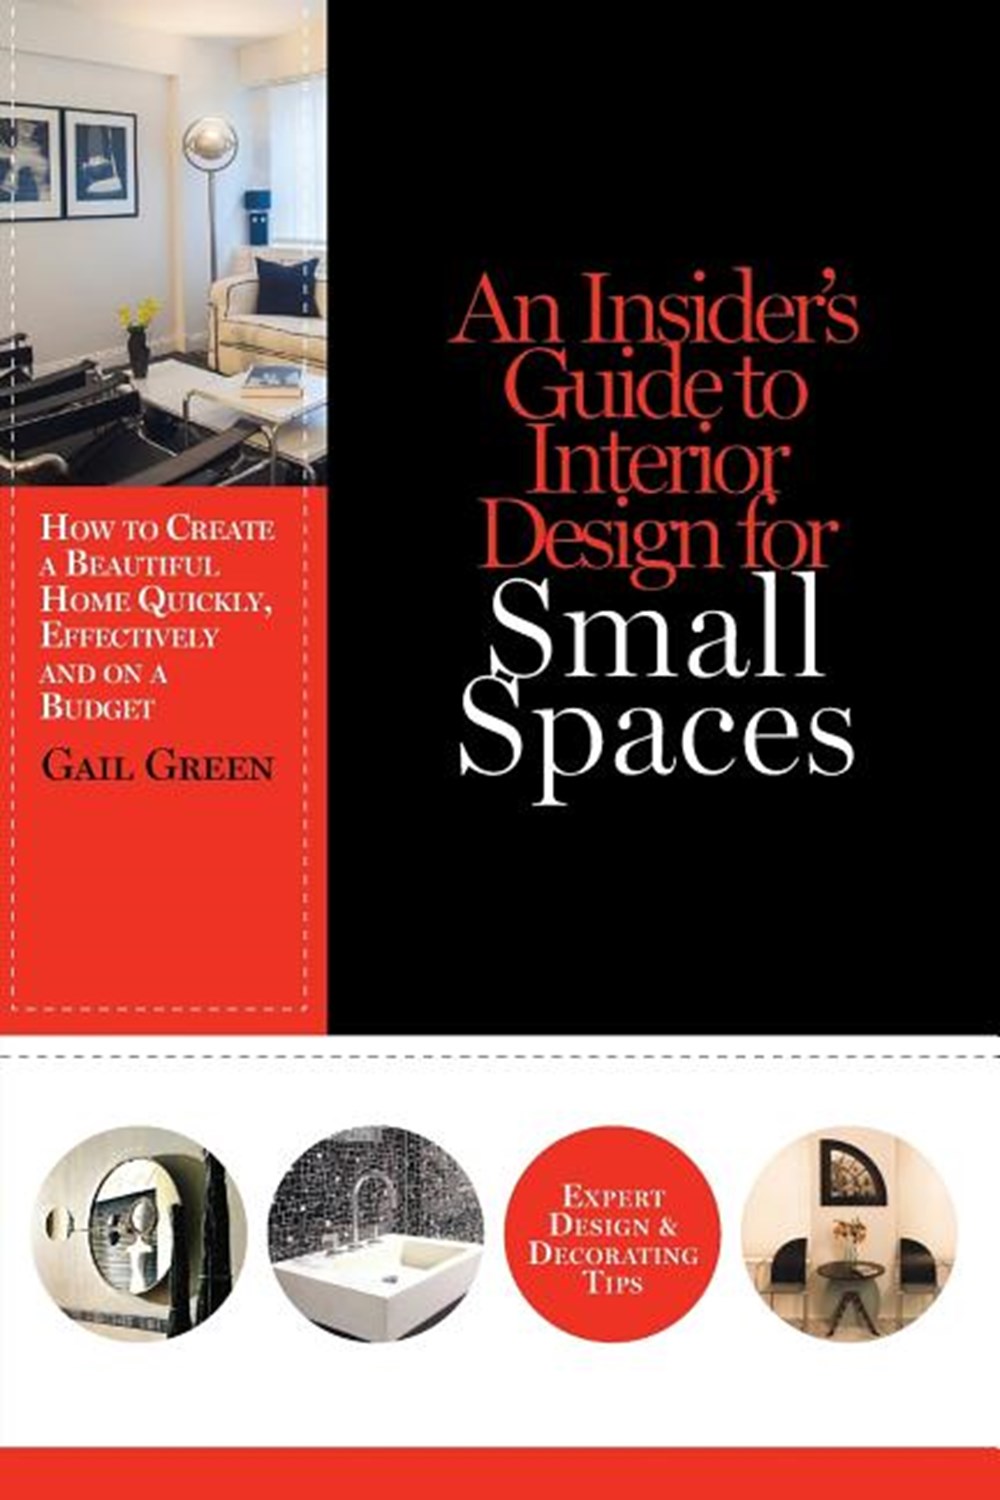 Insider's Guide to Interior Design for Small Spaces: How to Create a Beautiful Home Quickly, Effecti